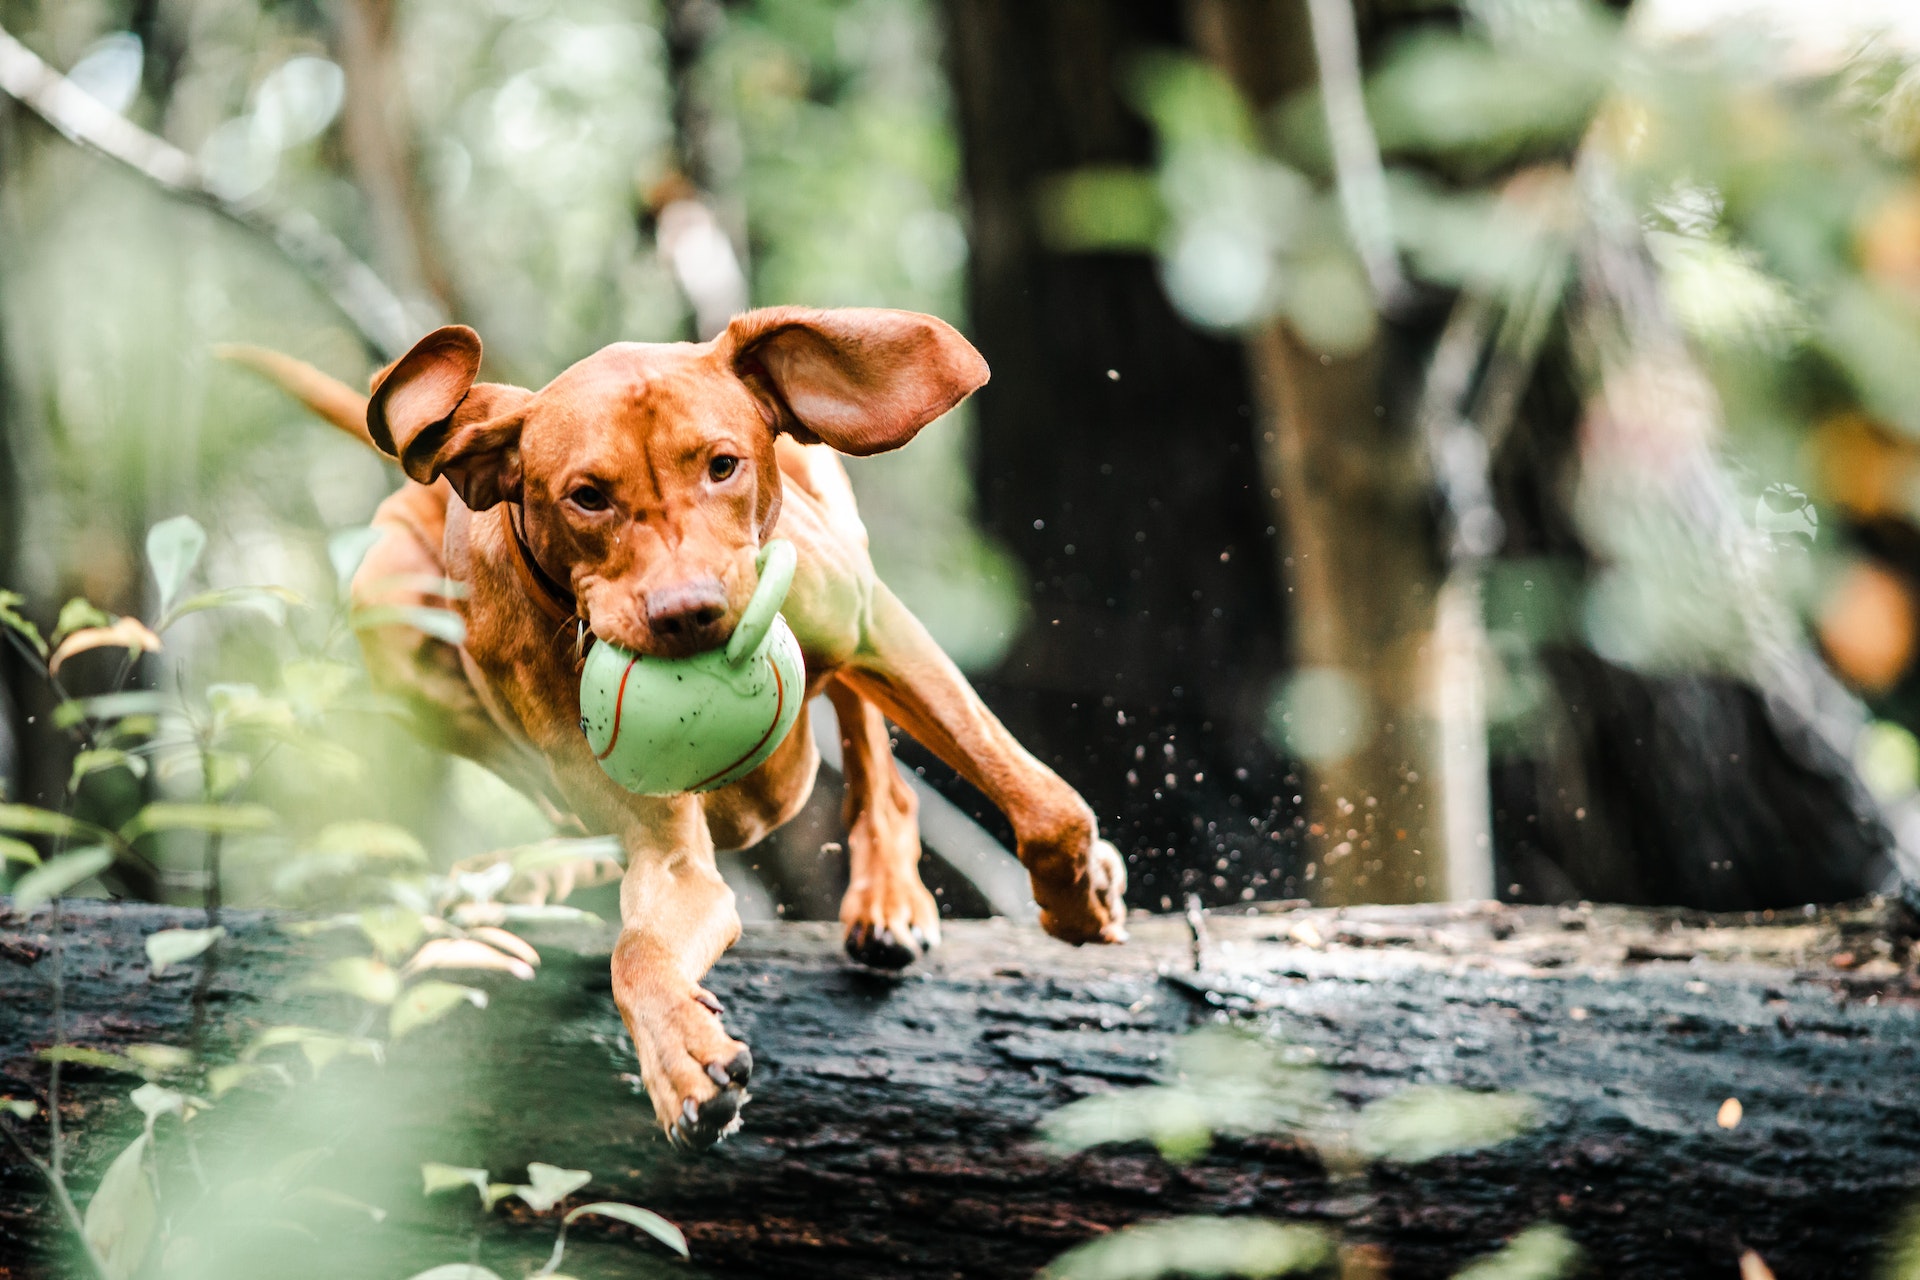 happy dog with tennis ball in mouth leaping over log